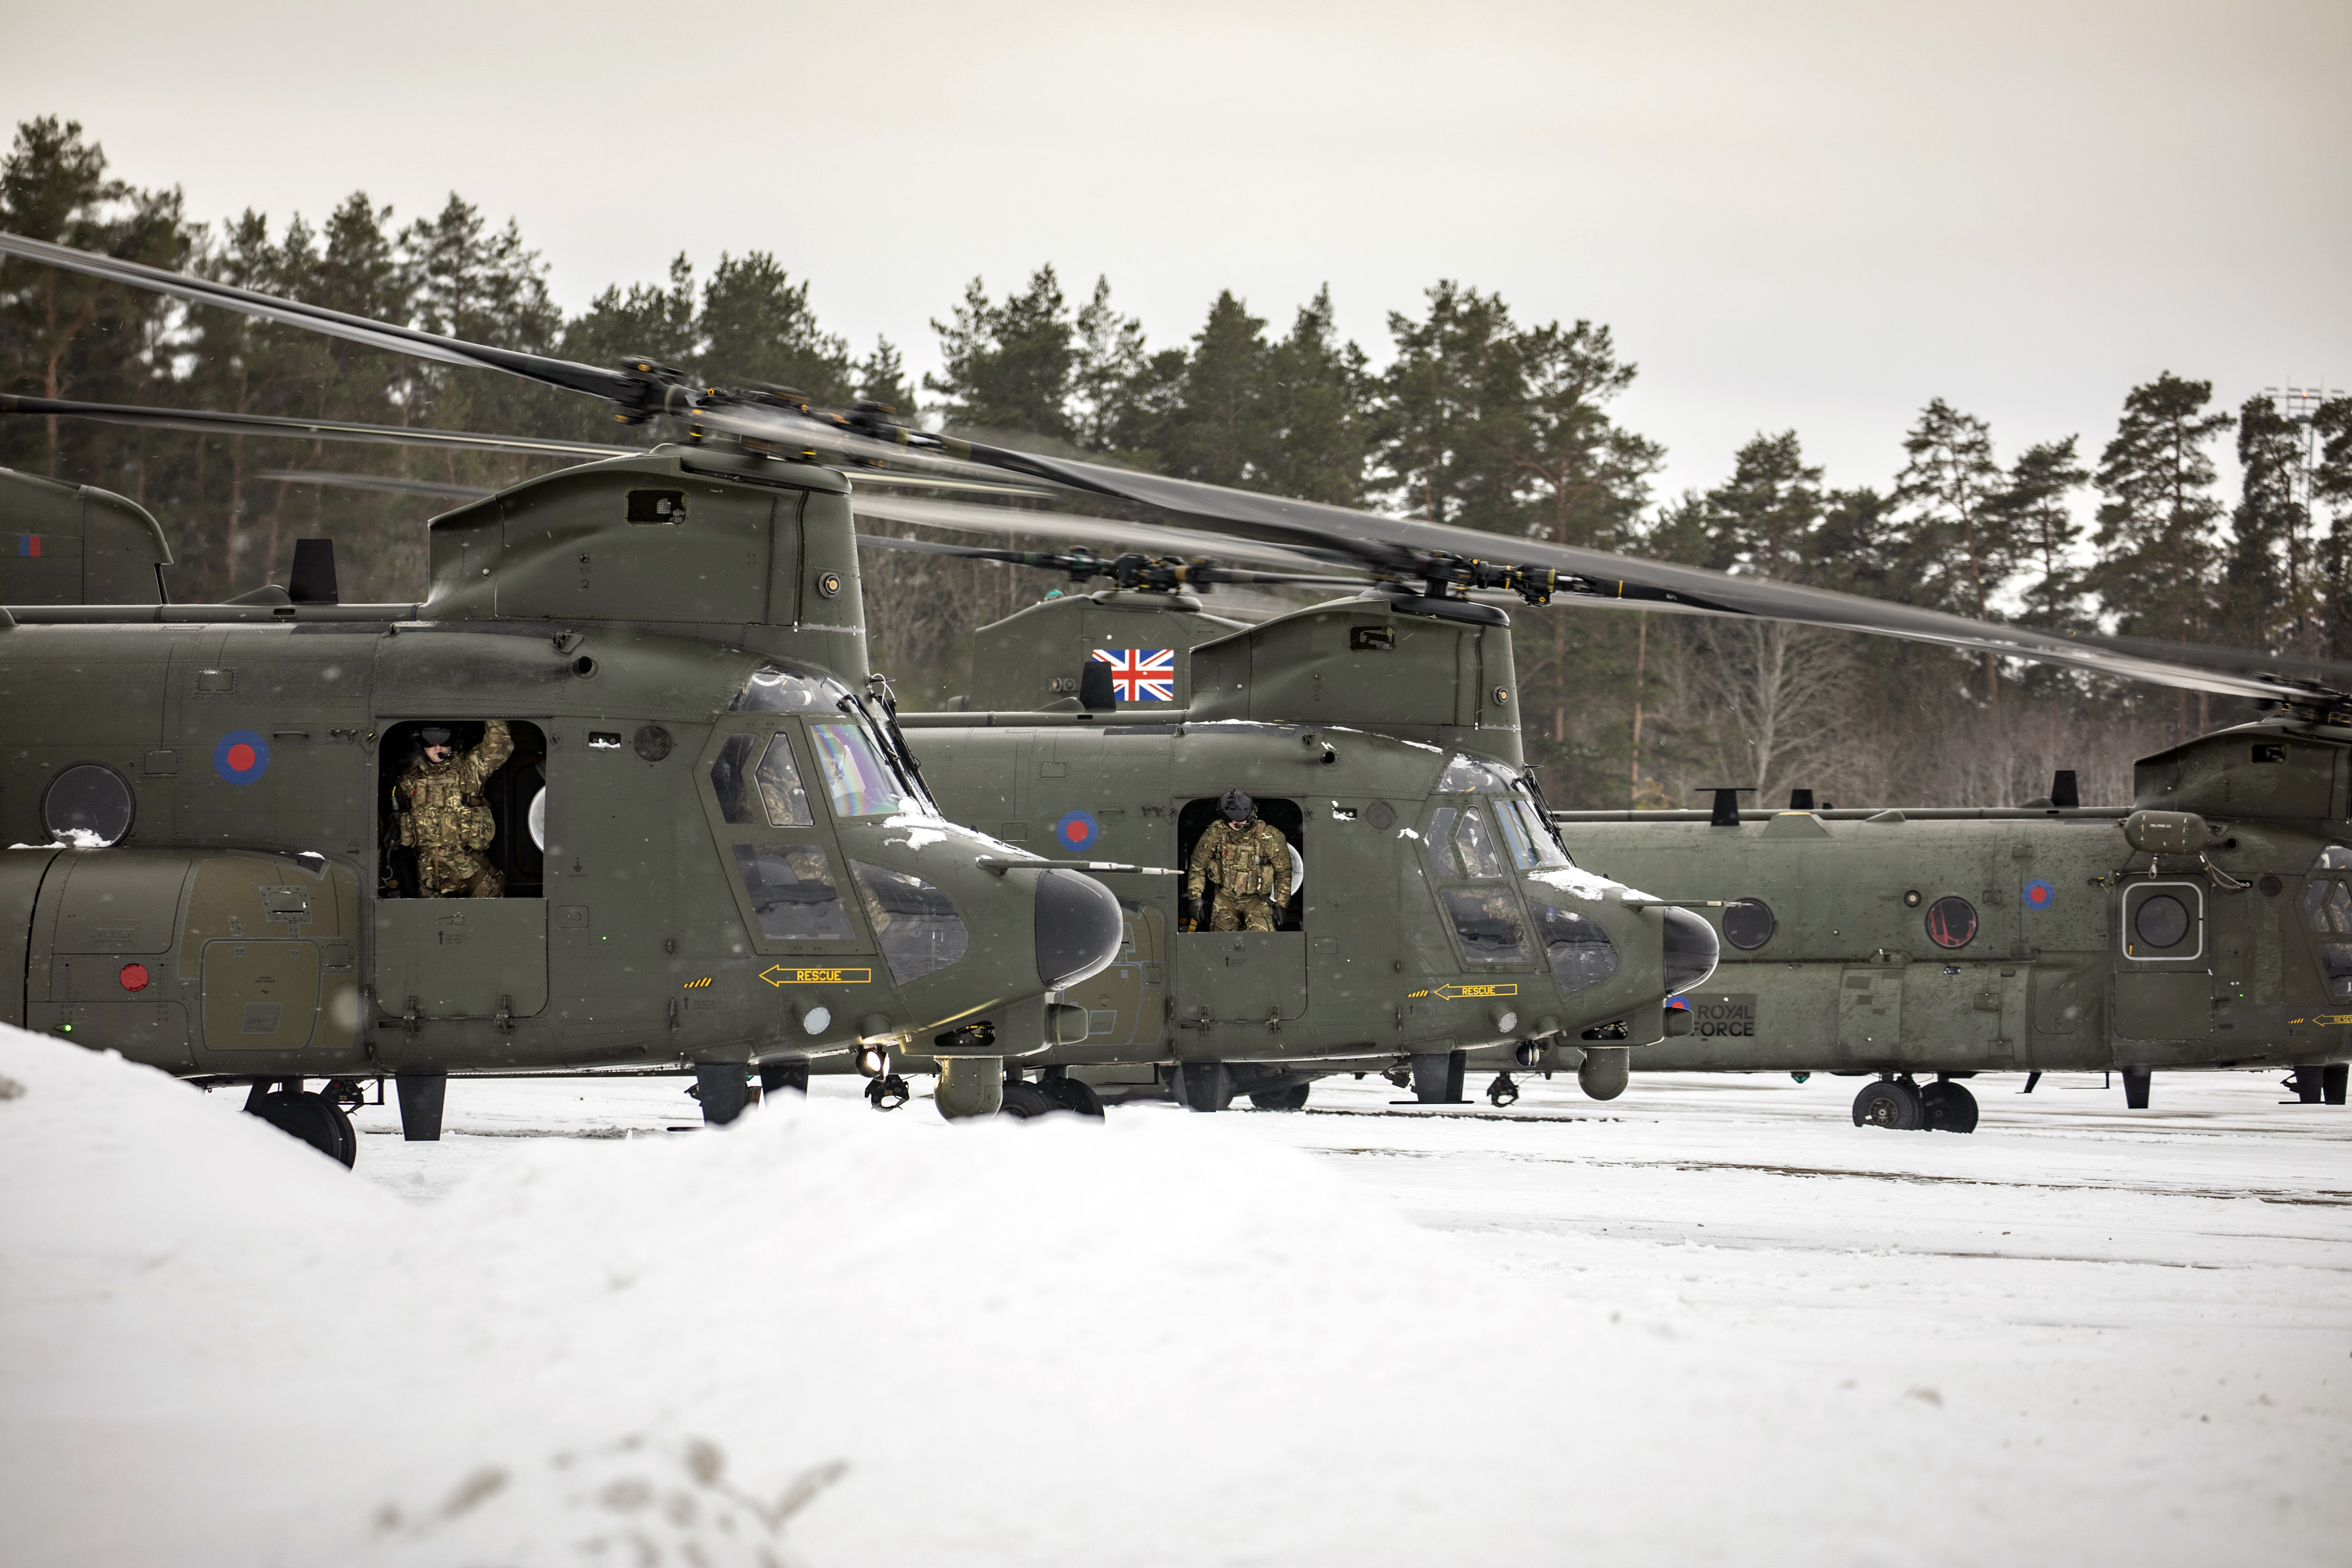 Image shows RAF Chinooks in a row, on a snowy airfield.